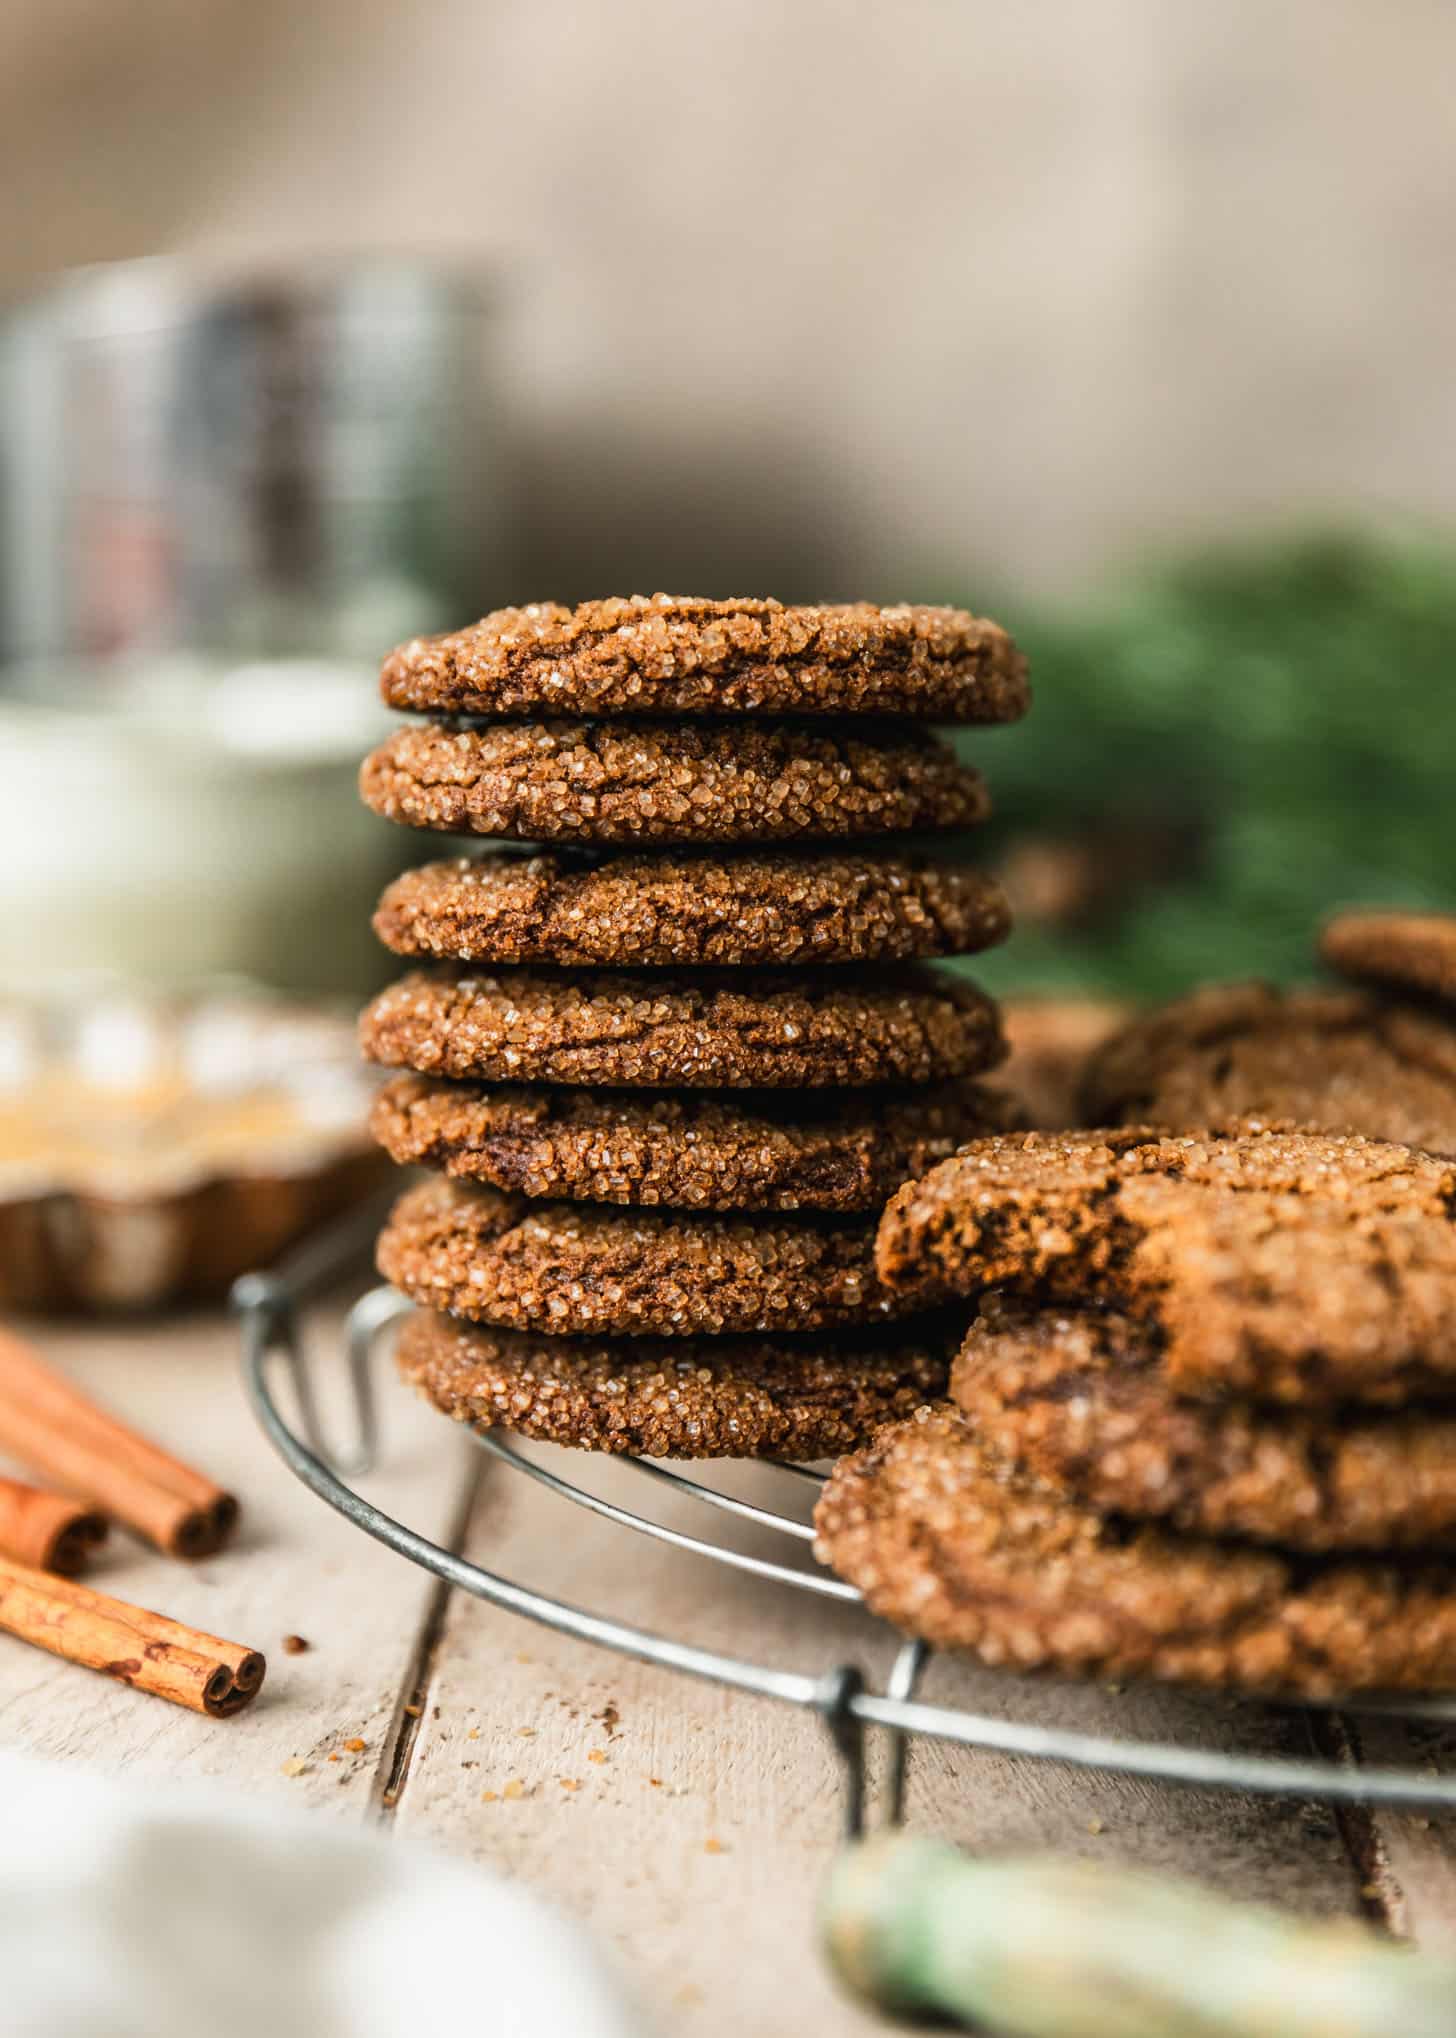 Cookies for a Cookie Exchange | A stack of chewy molasses crinkle cookies on a wire rack next to cinnamon sticks, garland, and a tan linen on a wood table.